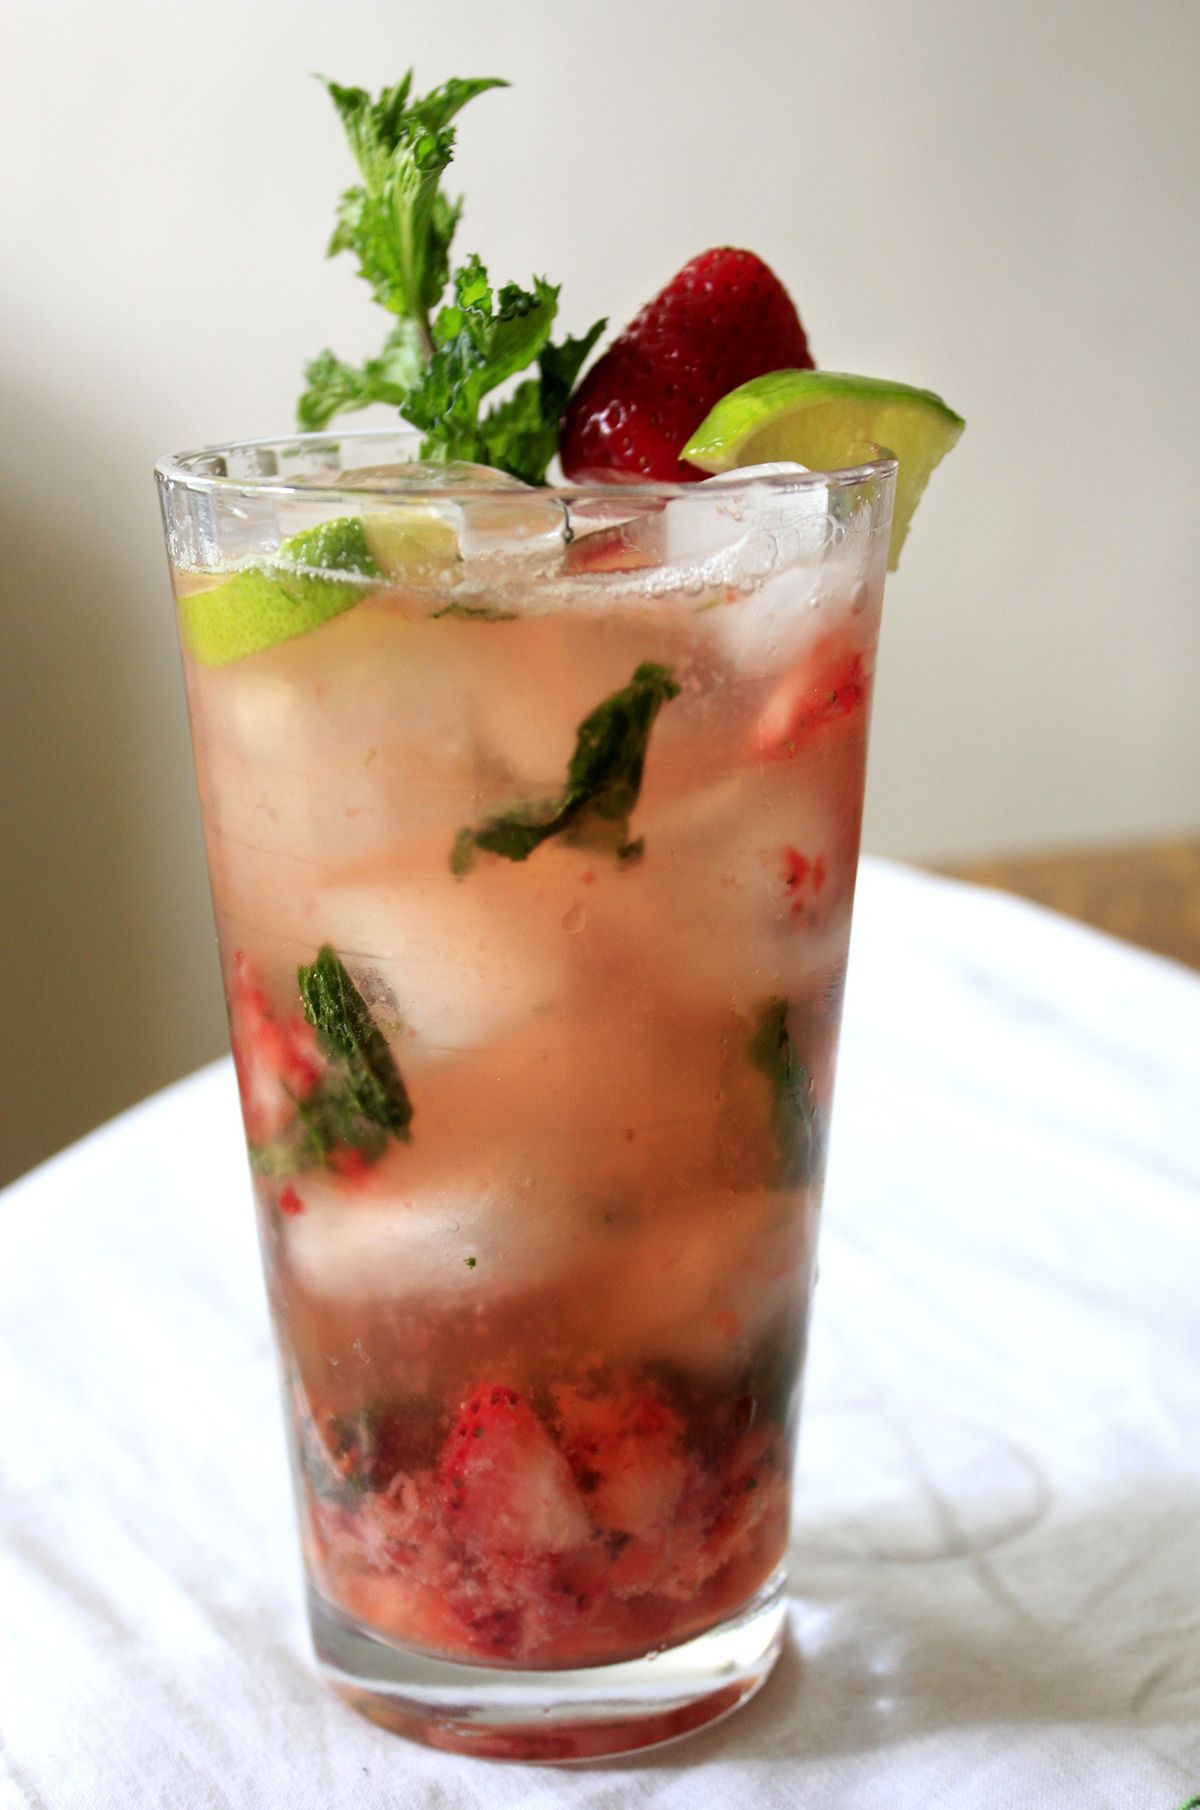 Muddled with mint, strawberries seem to make a classic mojito even more refreshing. (Adriana Janovich)